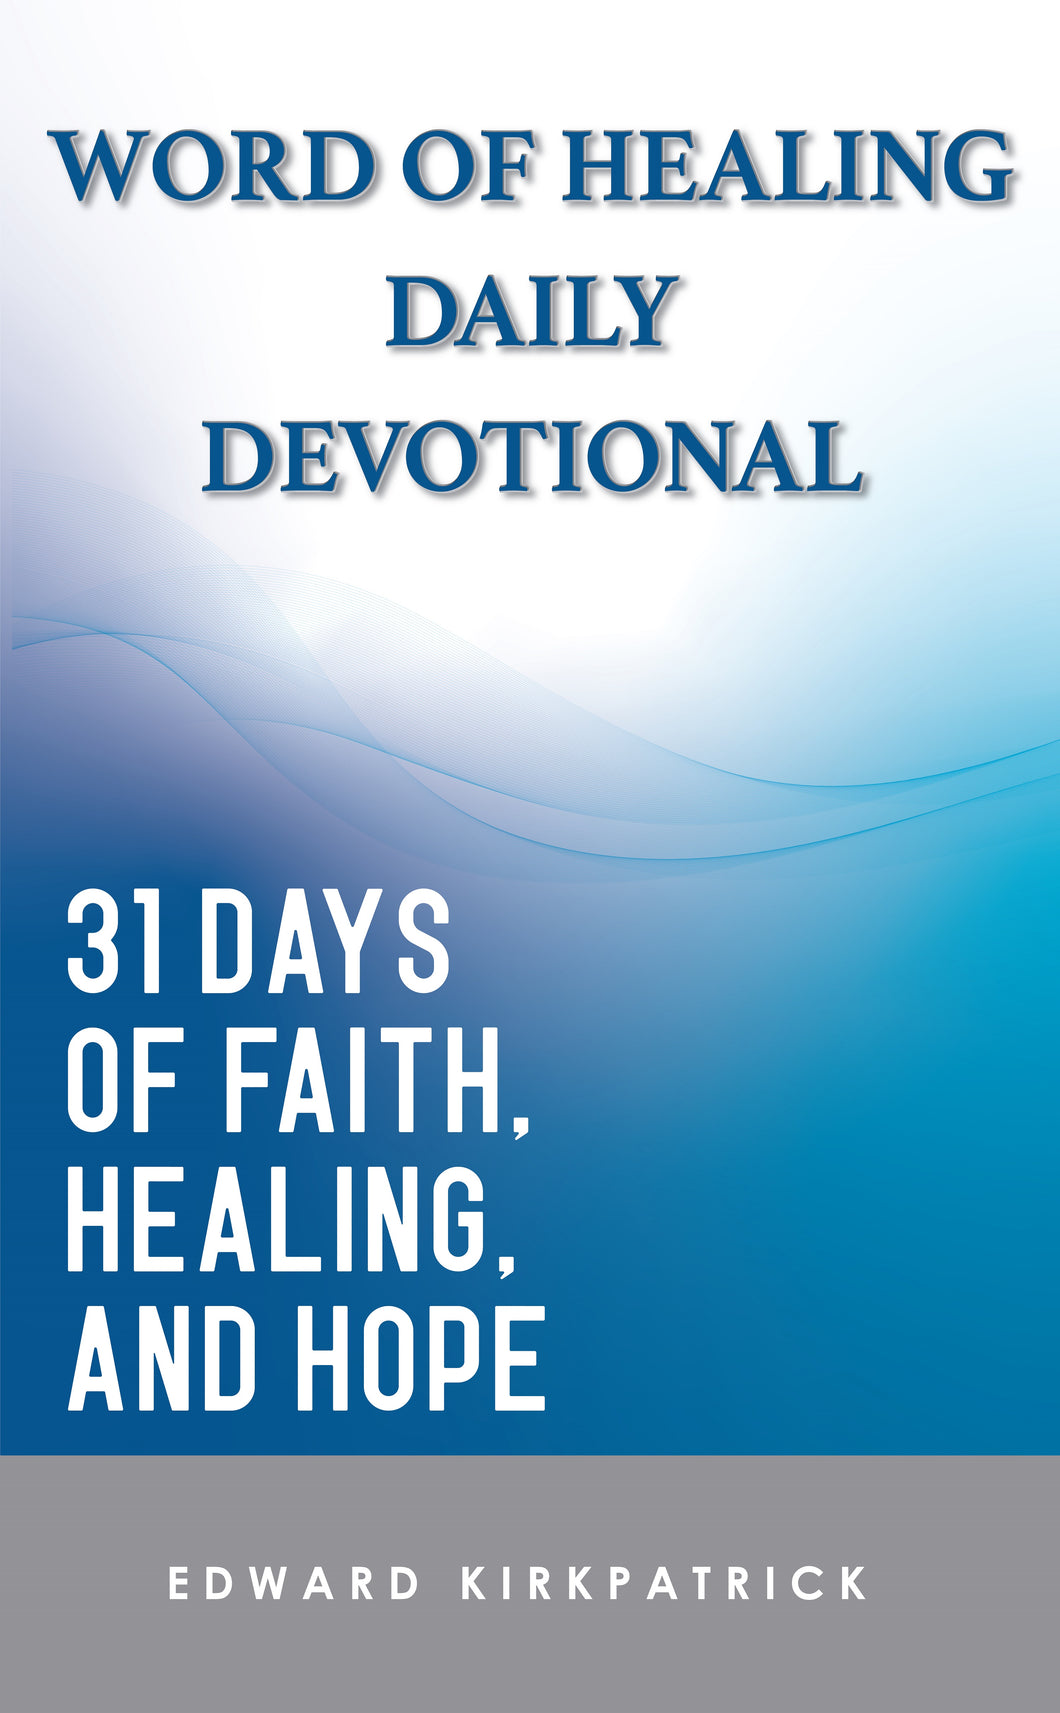 Word Of Healing Daily Devotional - 31 Days of Faith, Healing and Hope